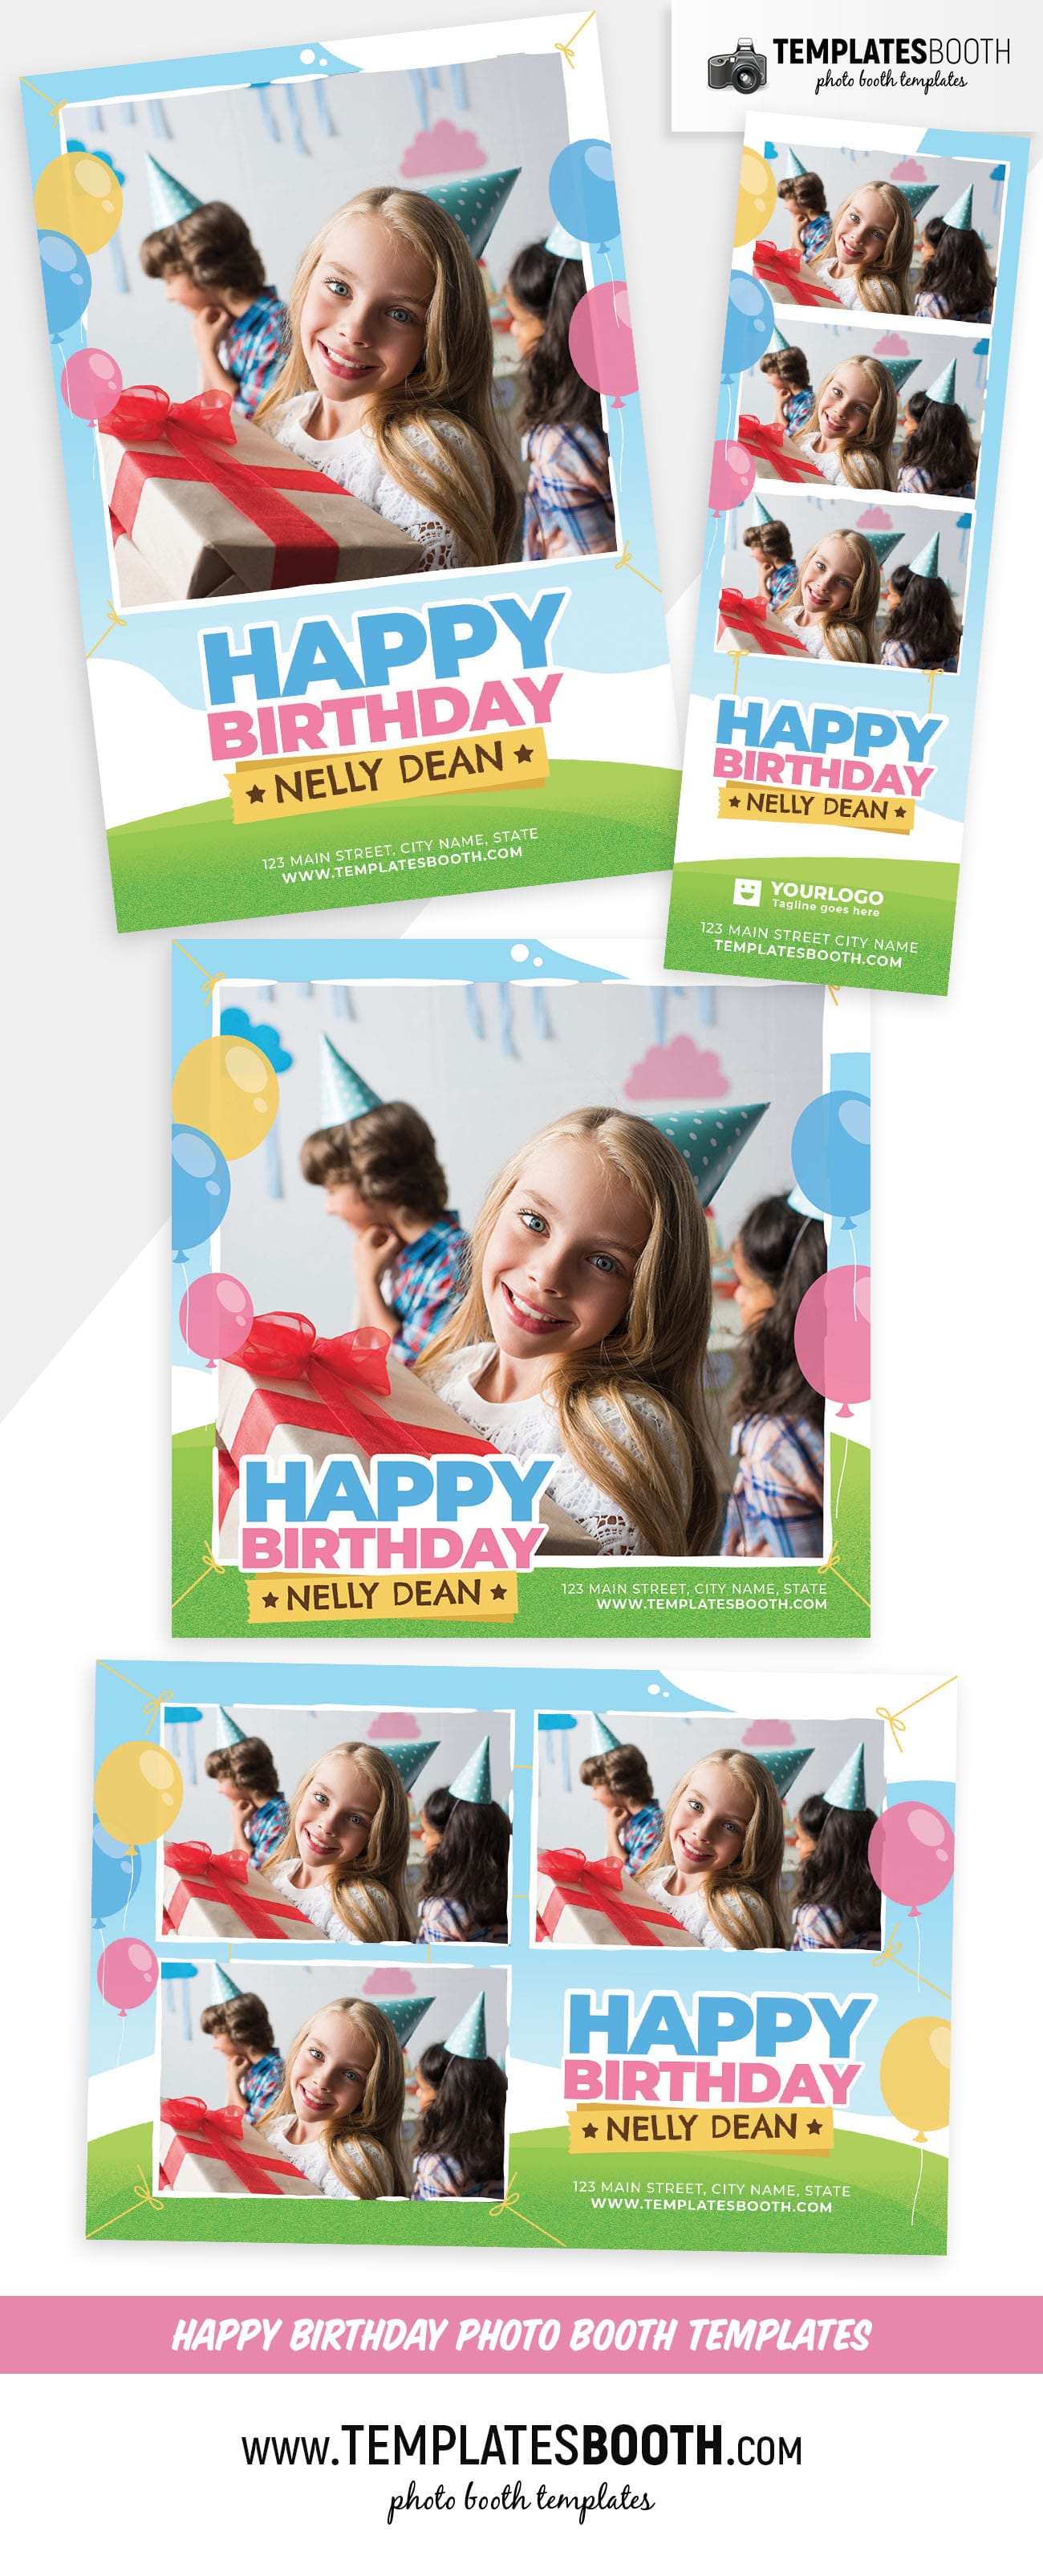 Happy Birthday Photo Booth Template (Full Preview)